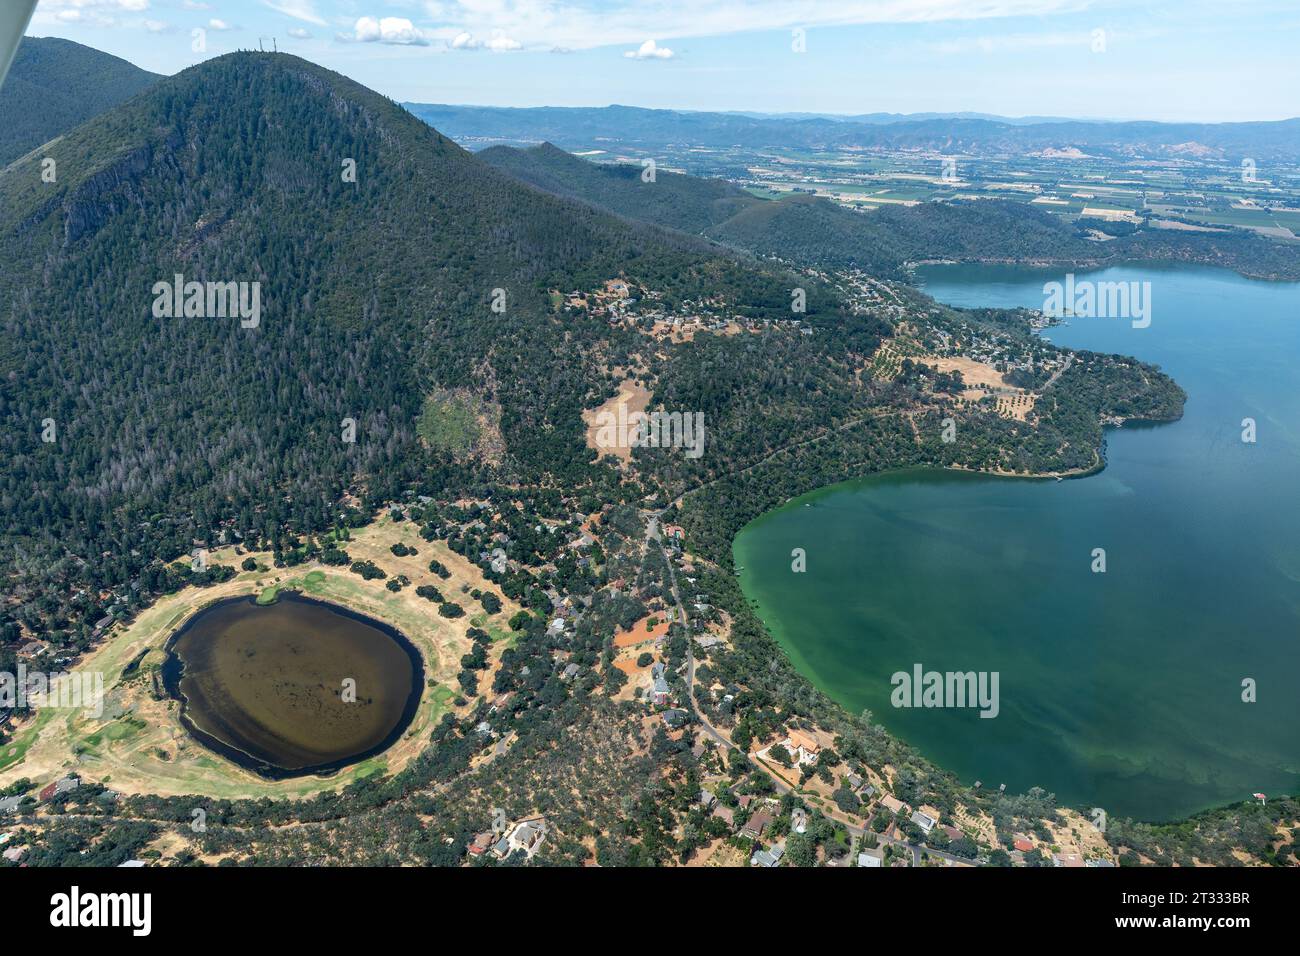 Topography of clear lake area with Green mountainsides farm lands and rolling hills which run off and form blooms of green algae in the lake Stock Photo